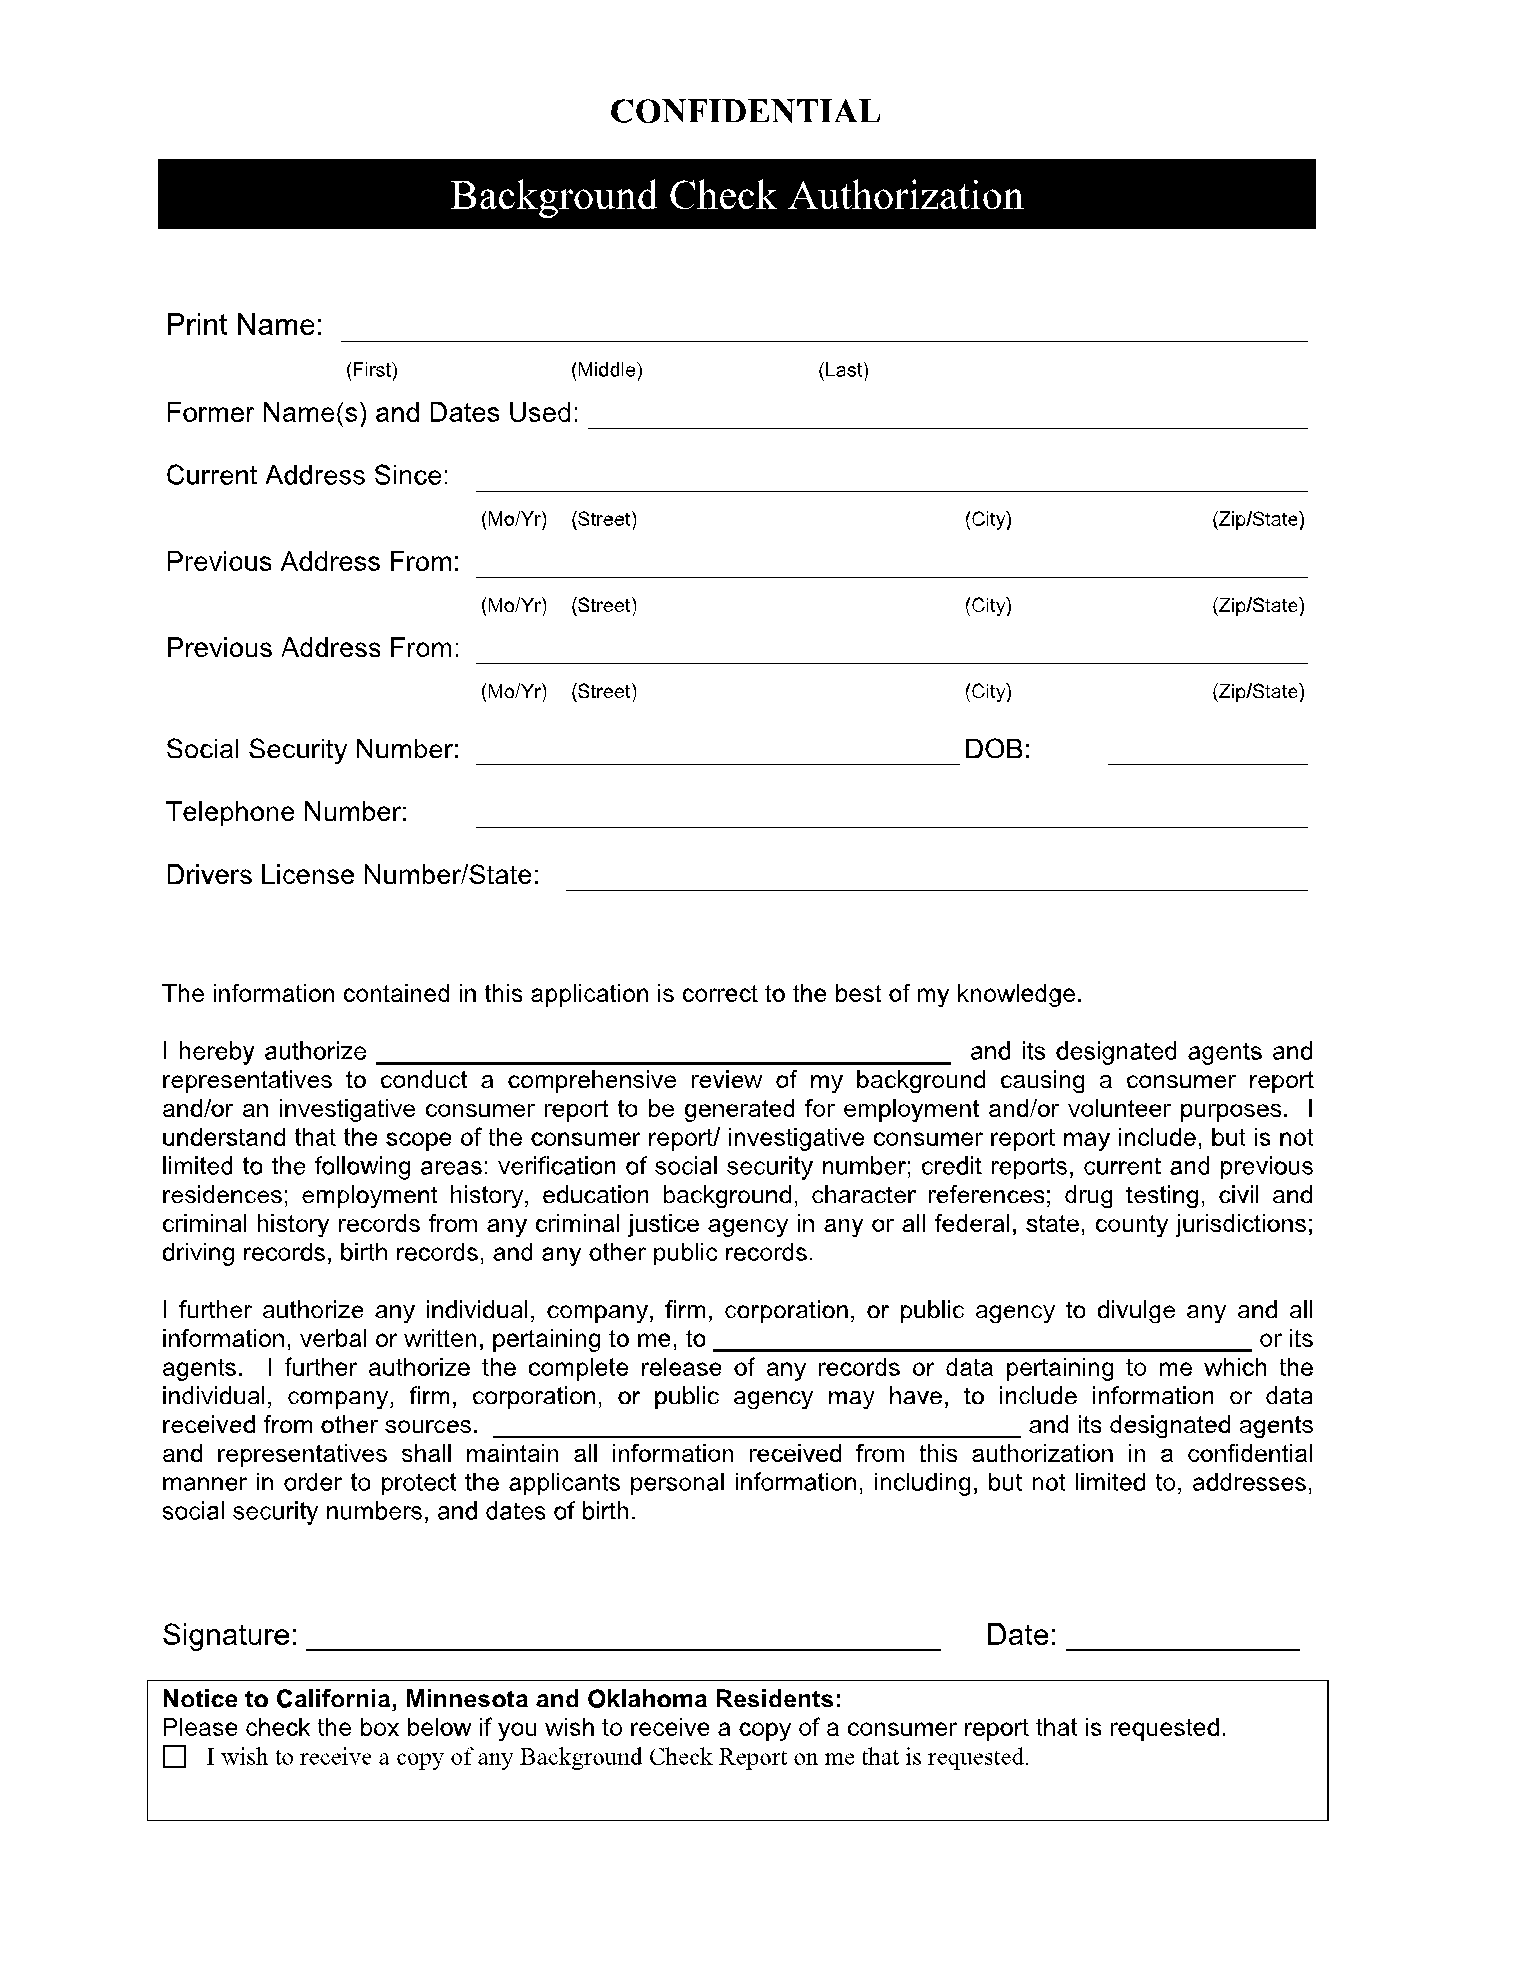 Background Check Authorization Consent Form